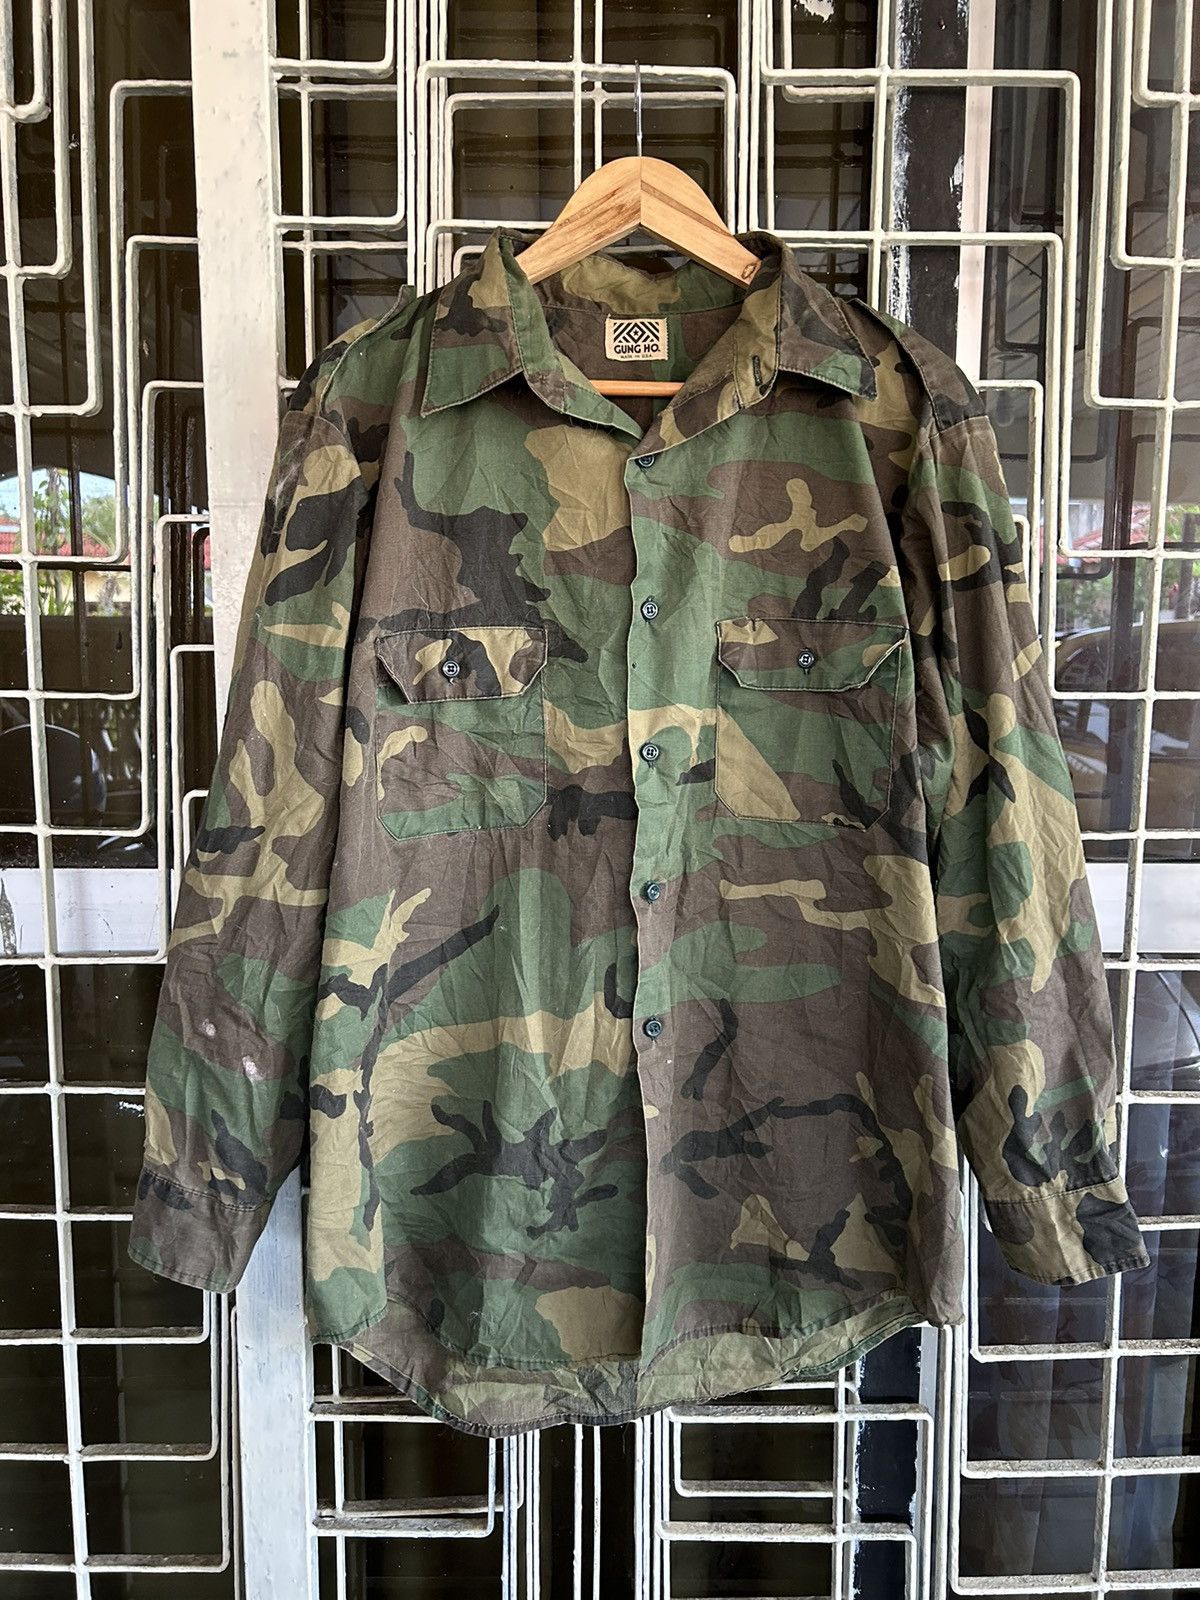 Military 💥 VINTAGE GUNG HO SHIRT BUTTON UP | Grailed